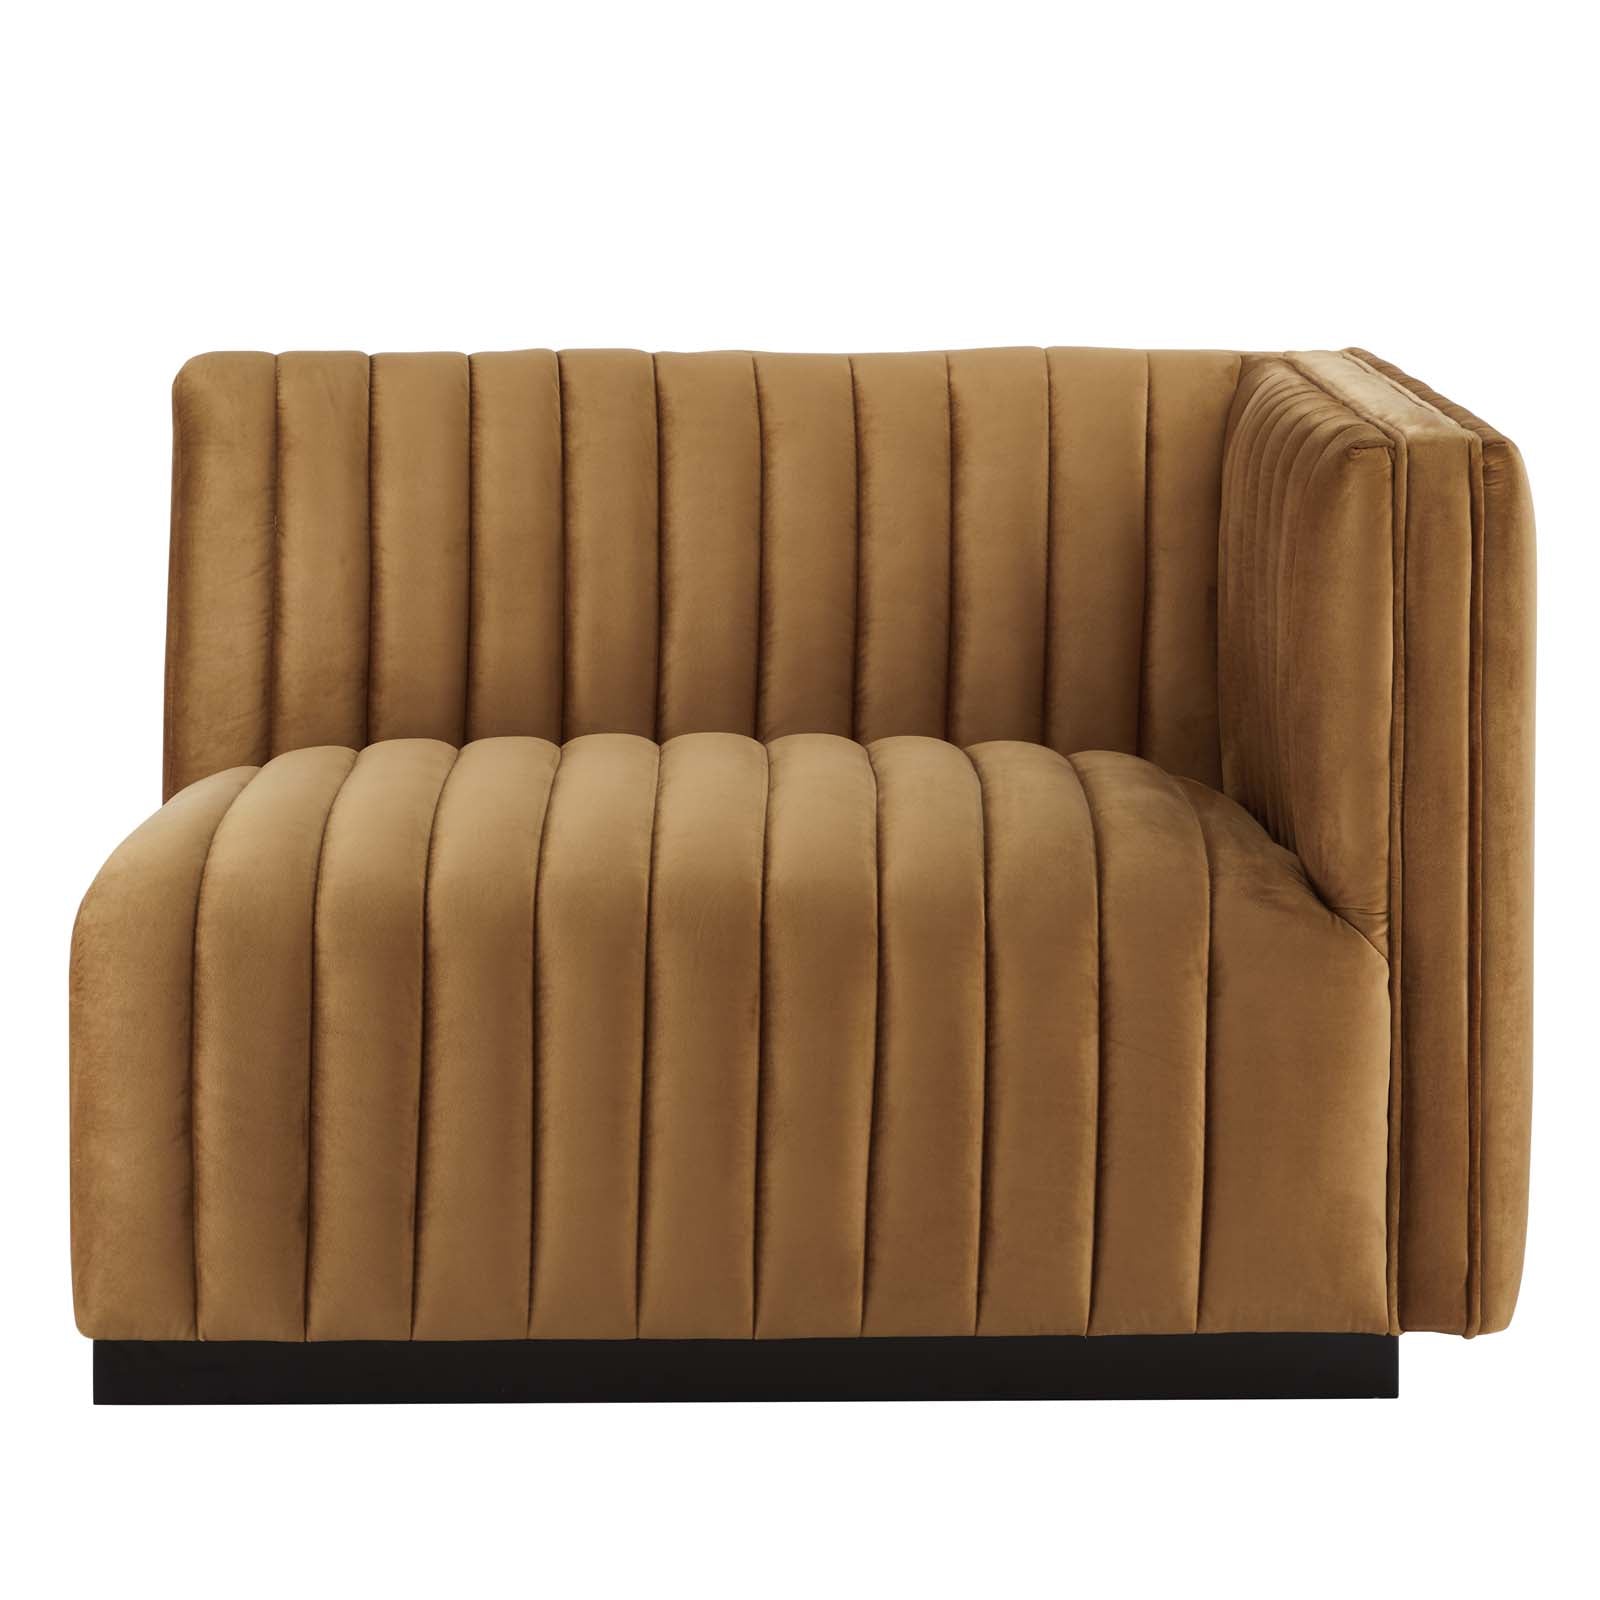 Conjure Channel Tufted Performance Velvet Right-Arm Chair